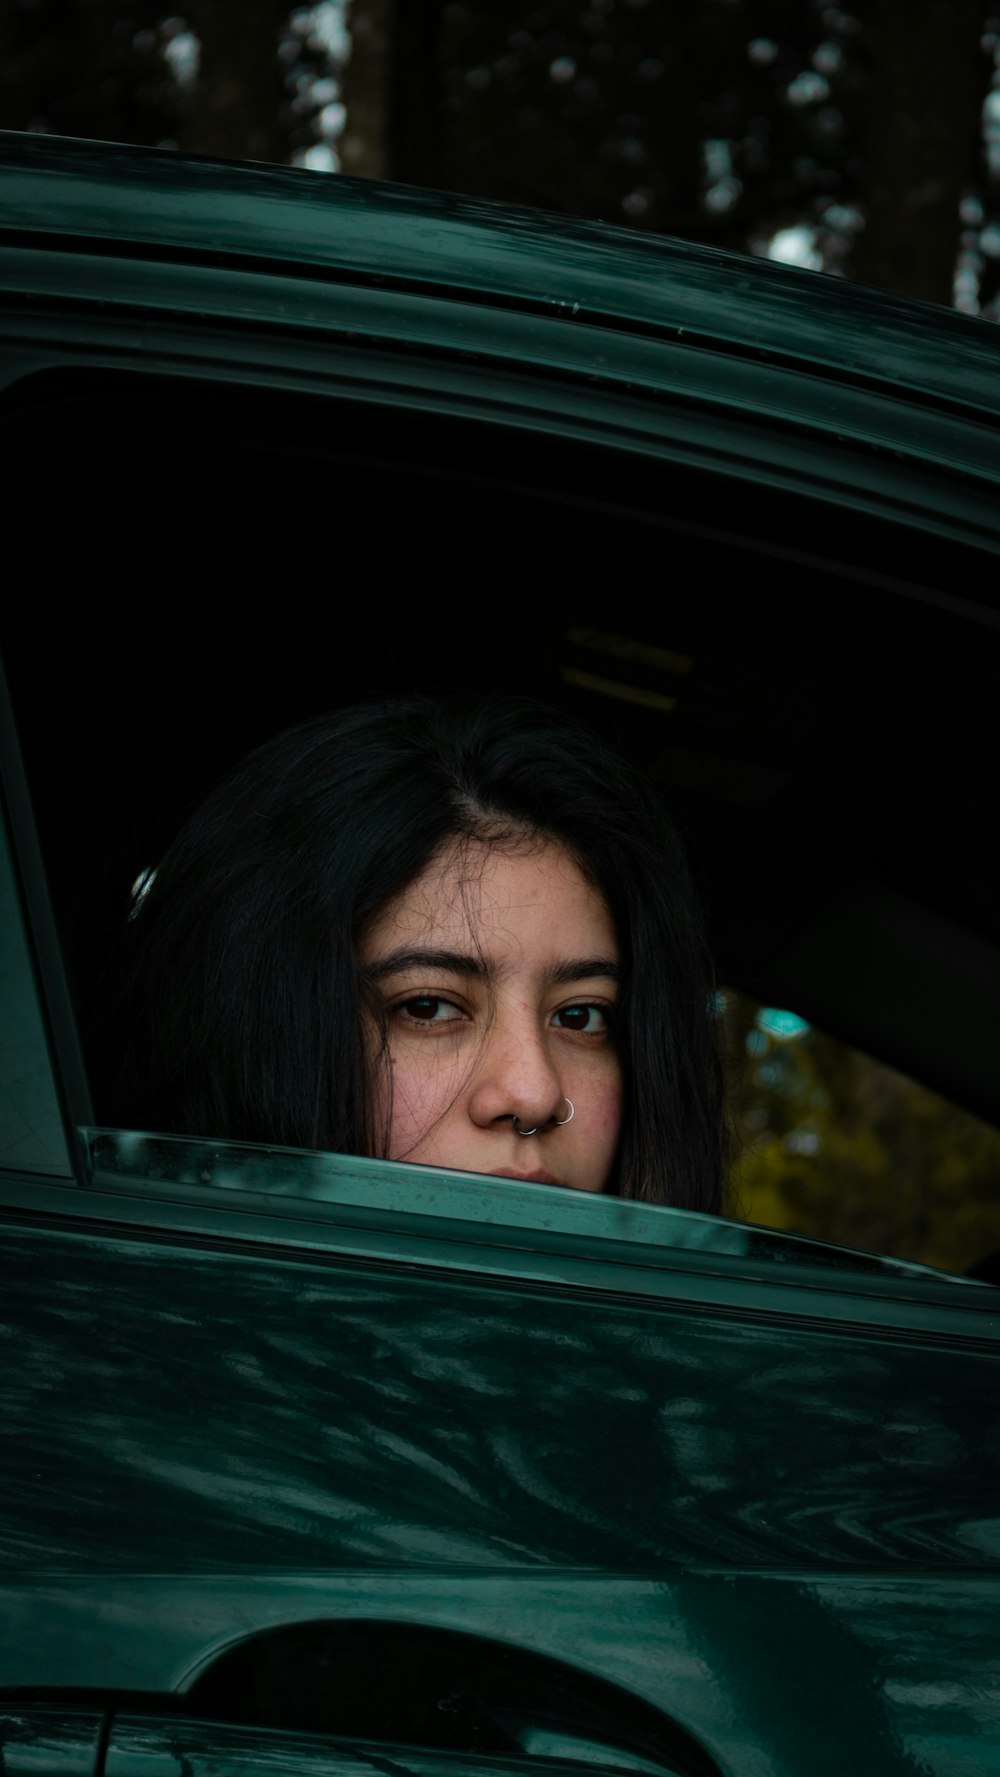 a person looking out of a car window